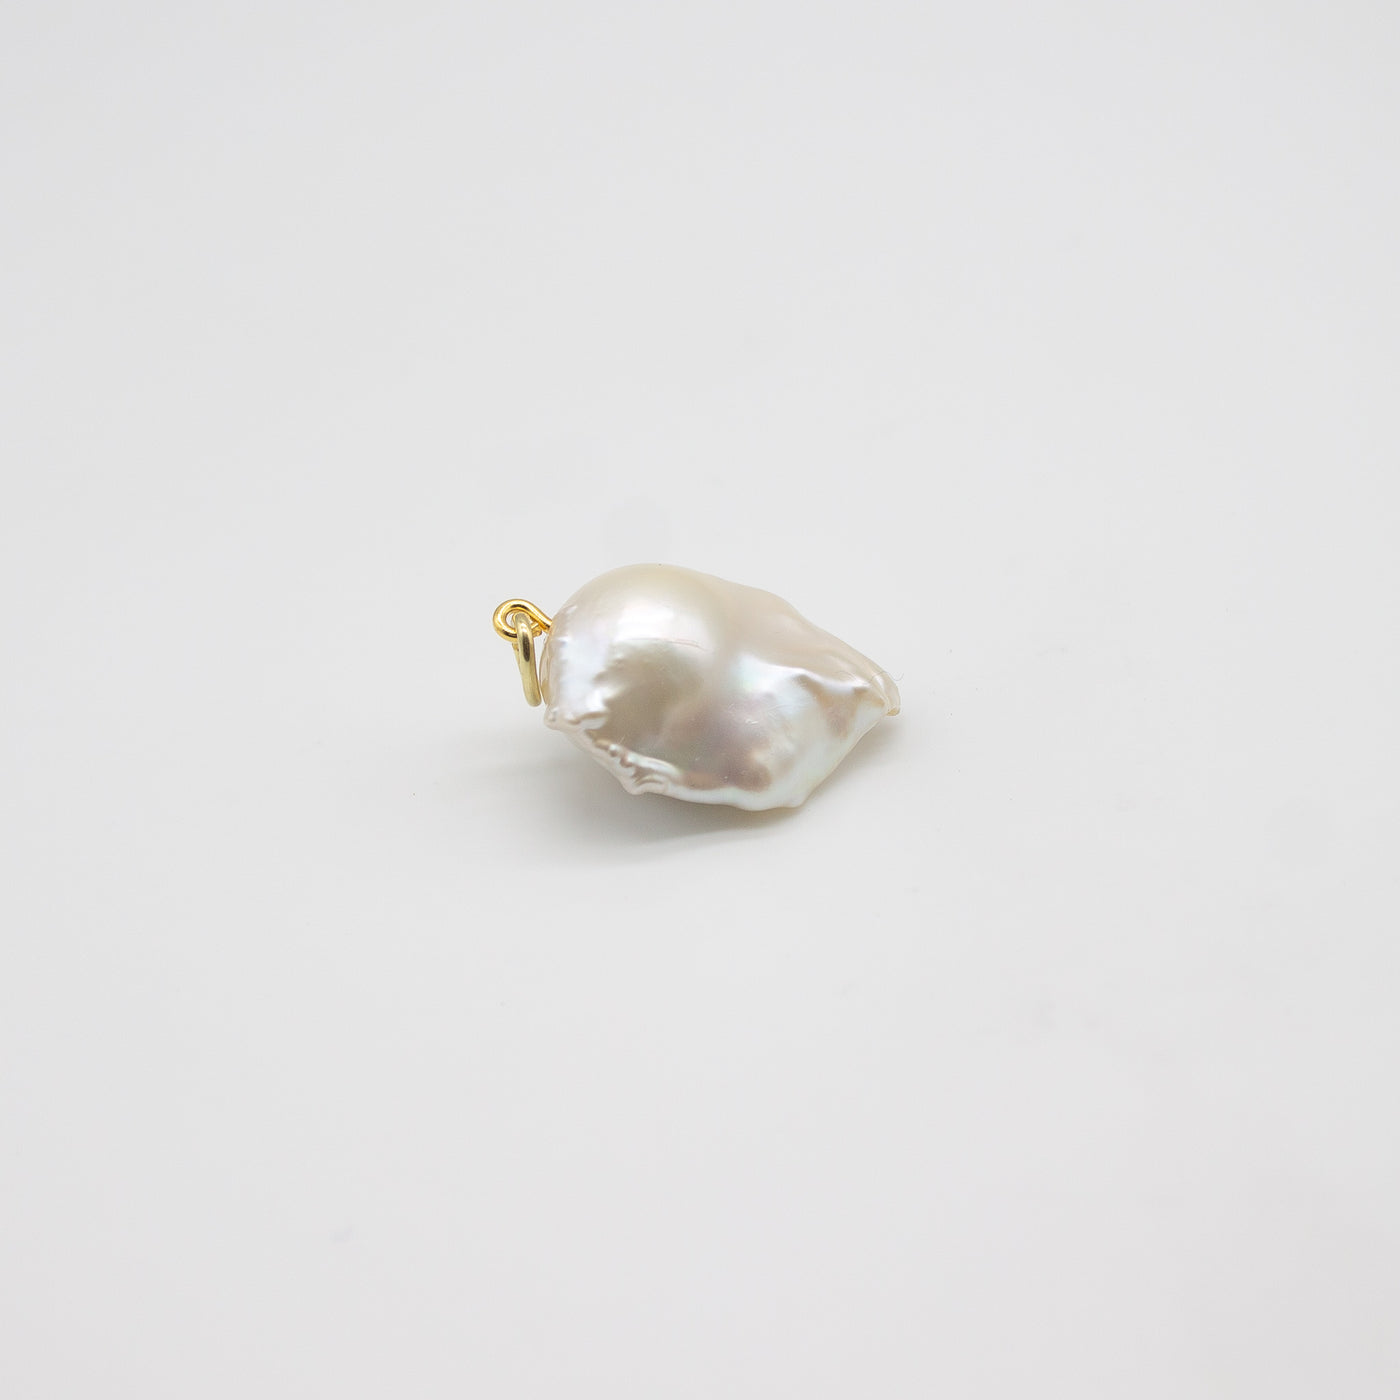 SALINA // Pendant with a baroque pearl in a gold-plated setting (without chain)